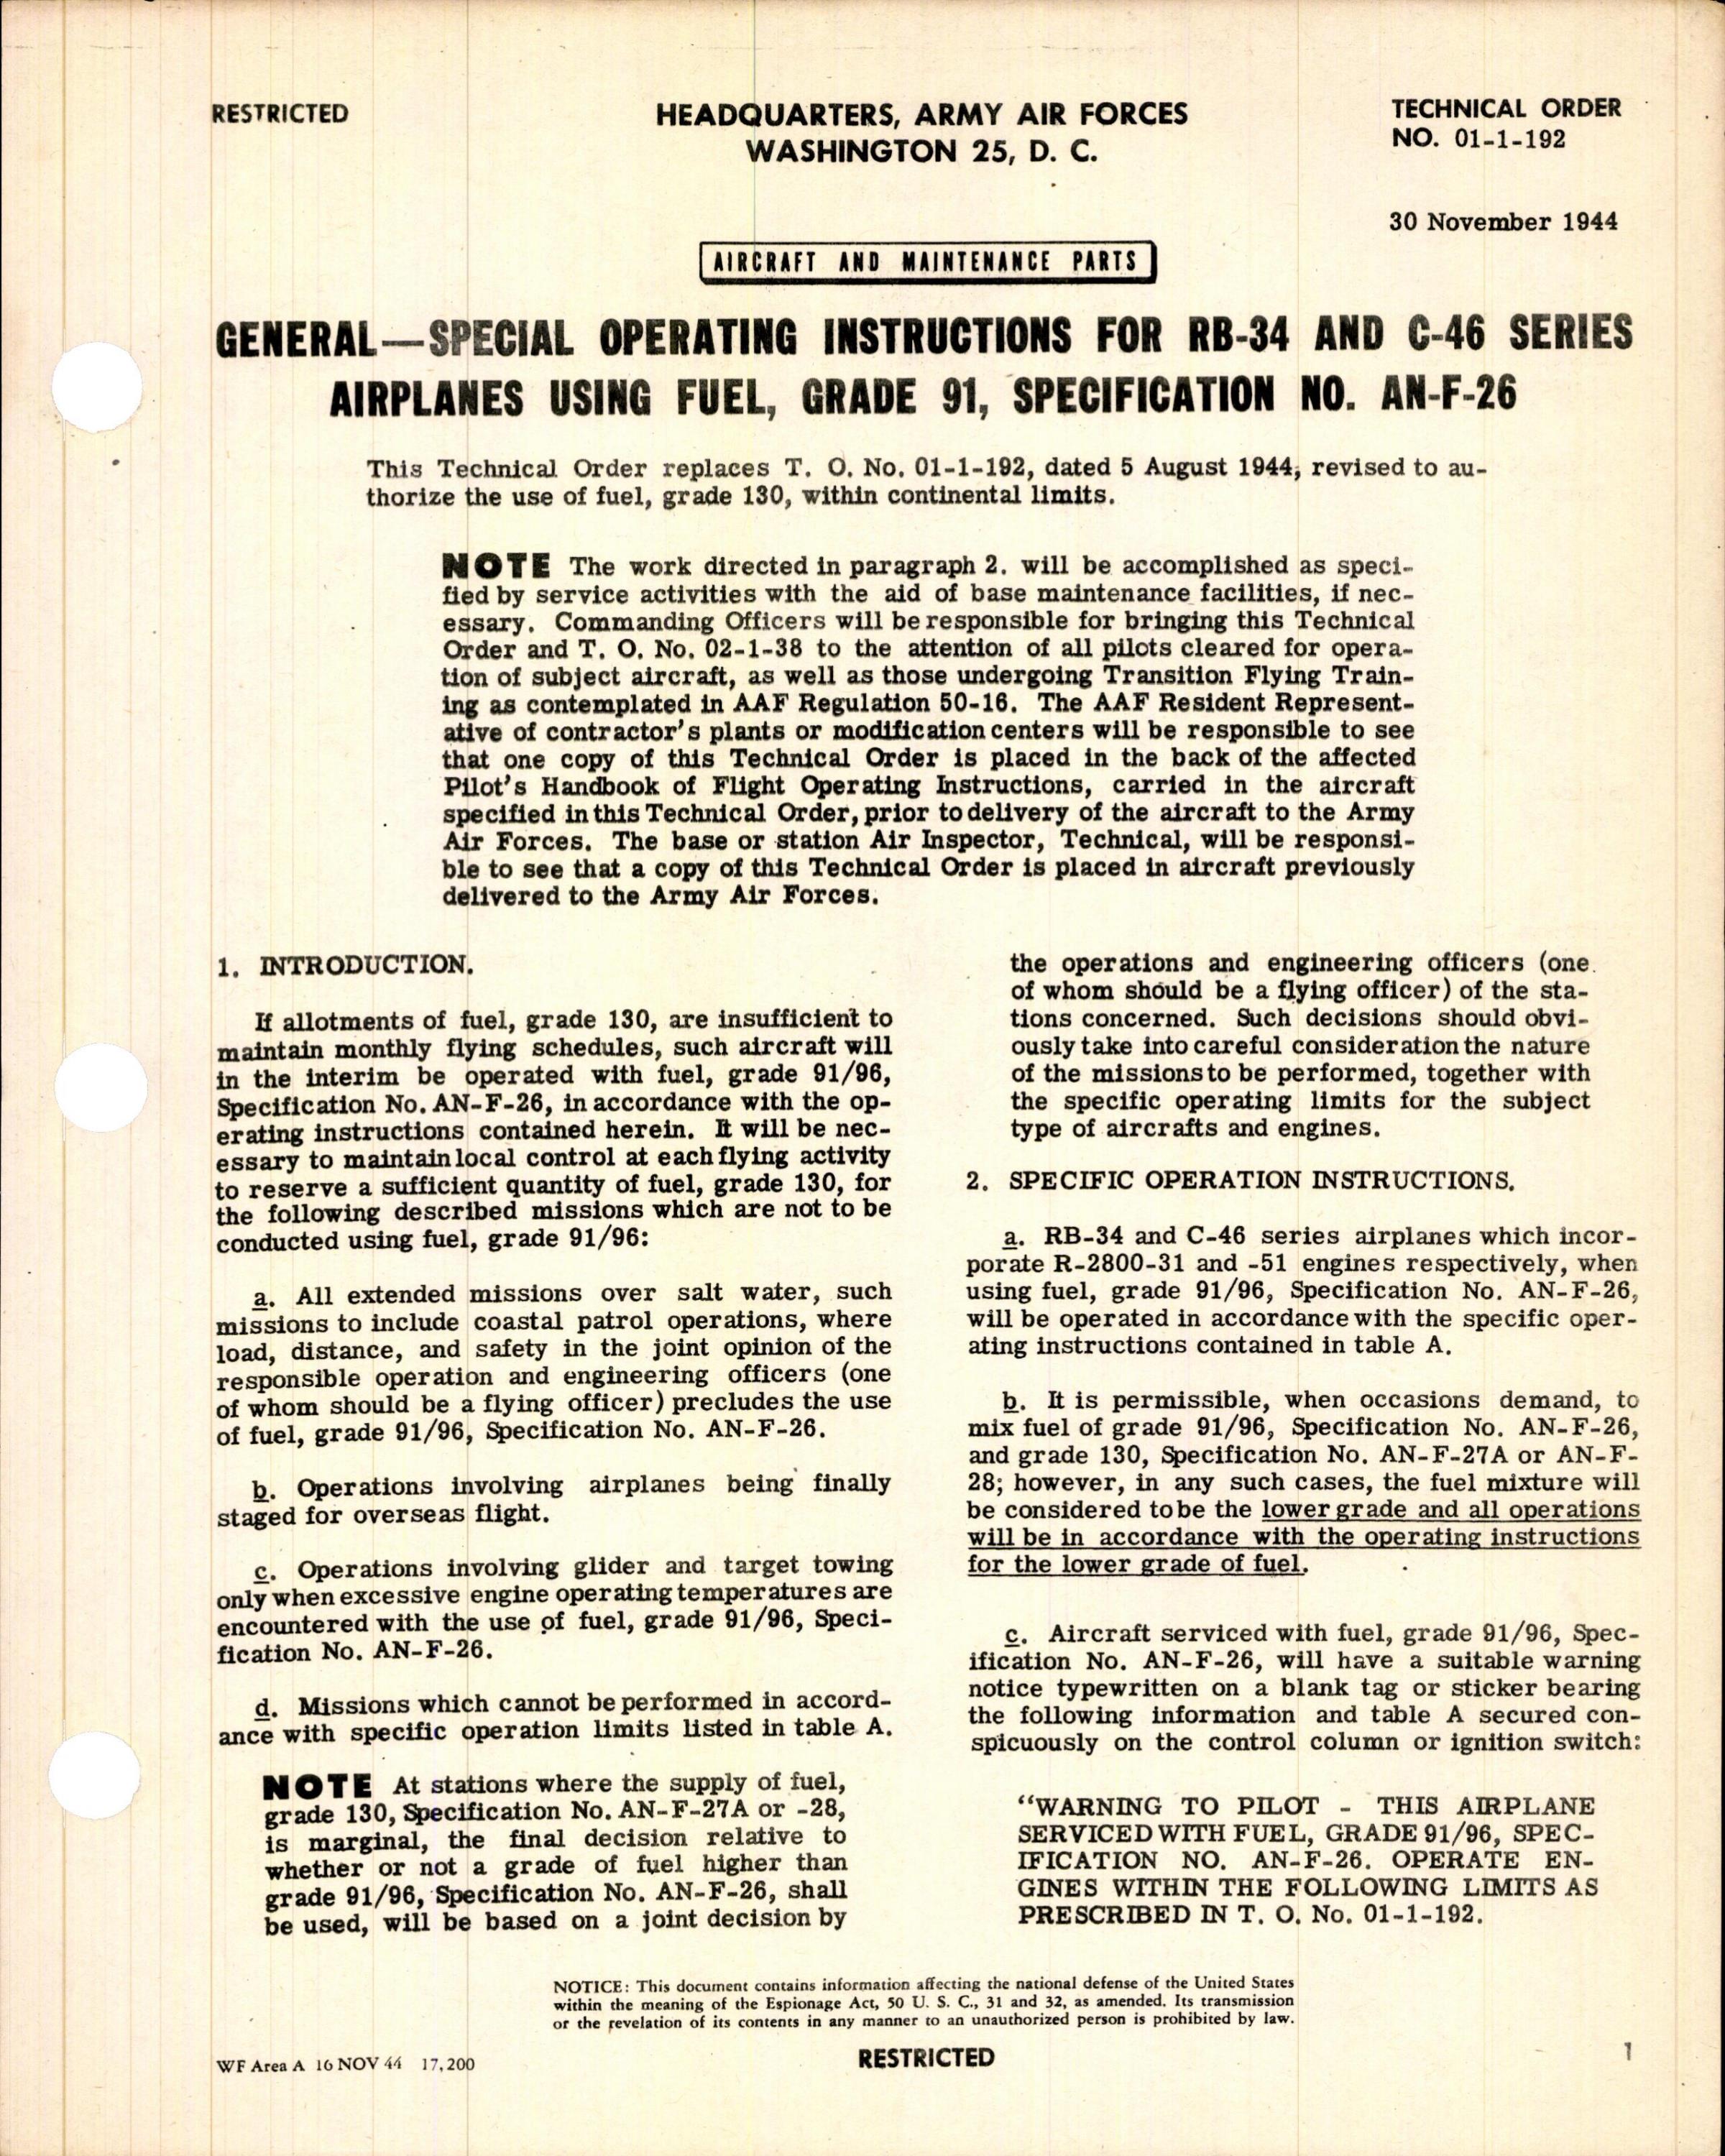 Sample page 1 from AirCorps Library document: Special Operating Instructions for RB-34 and C-46 Series Airplanes using Fuel Grade 91